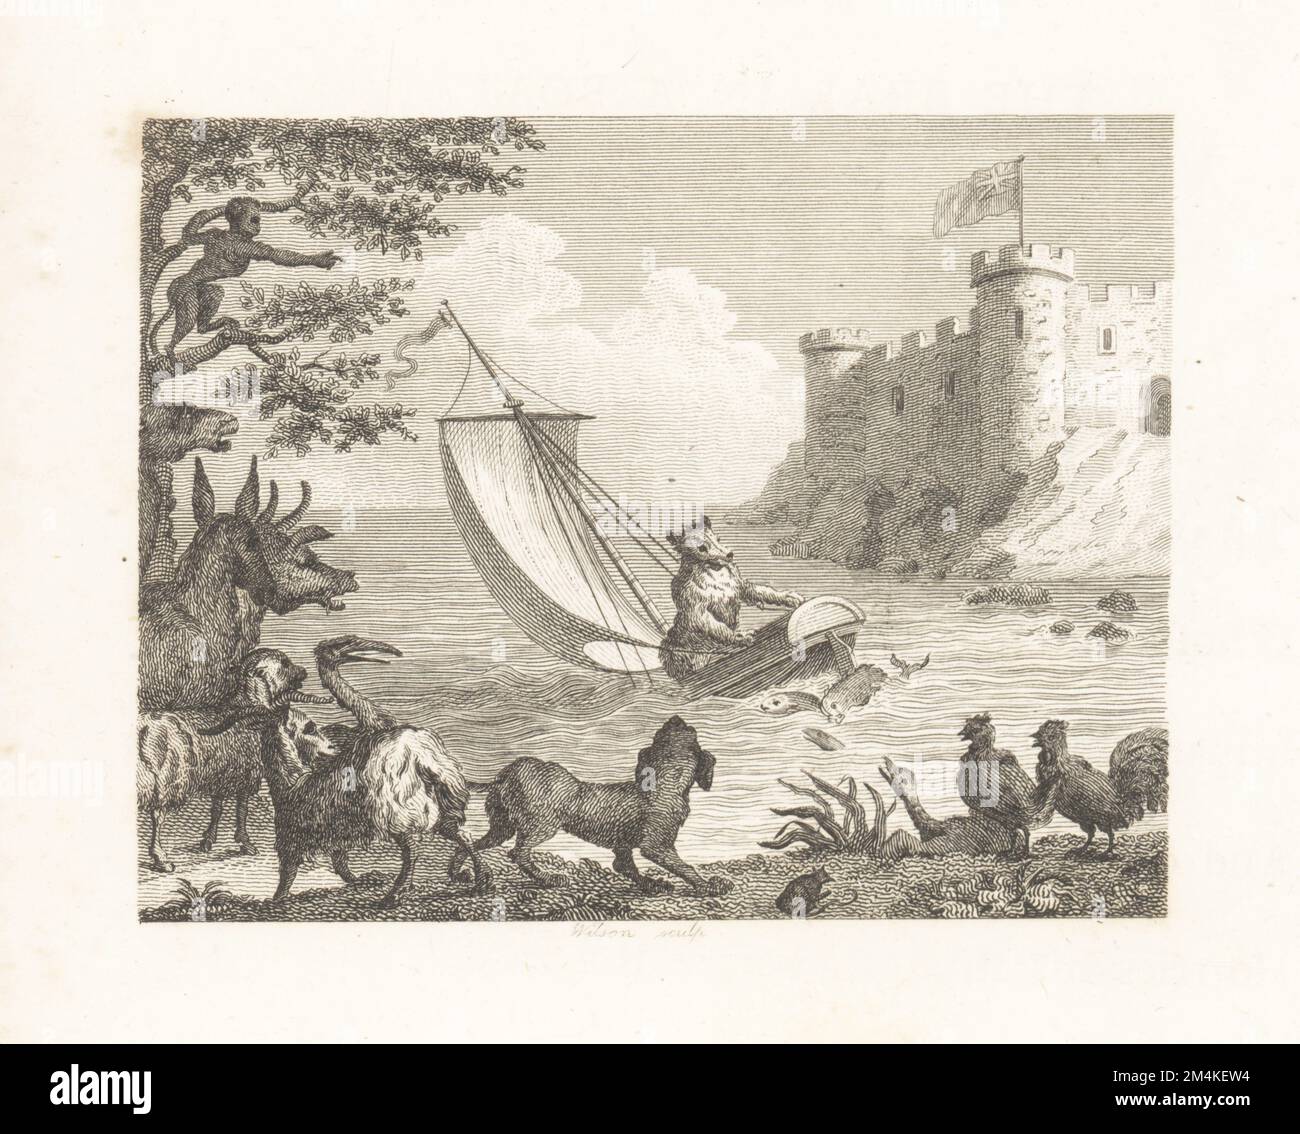 The Bear in a Boat. An arrogant bear boards a sailboat and runs aground near a castle. A monkey, dog, cow, goose, mouse and other animals laugh from the shore. Copperplate engraving by Wilson after an illustration by Hubert Francois Bourguignon Gravelot from Fables by John Gay, with a Life of the Author, John Stockdale, London, 1793. Stock Photo